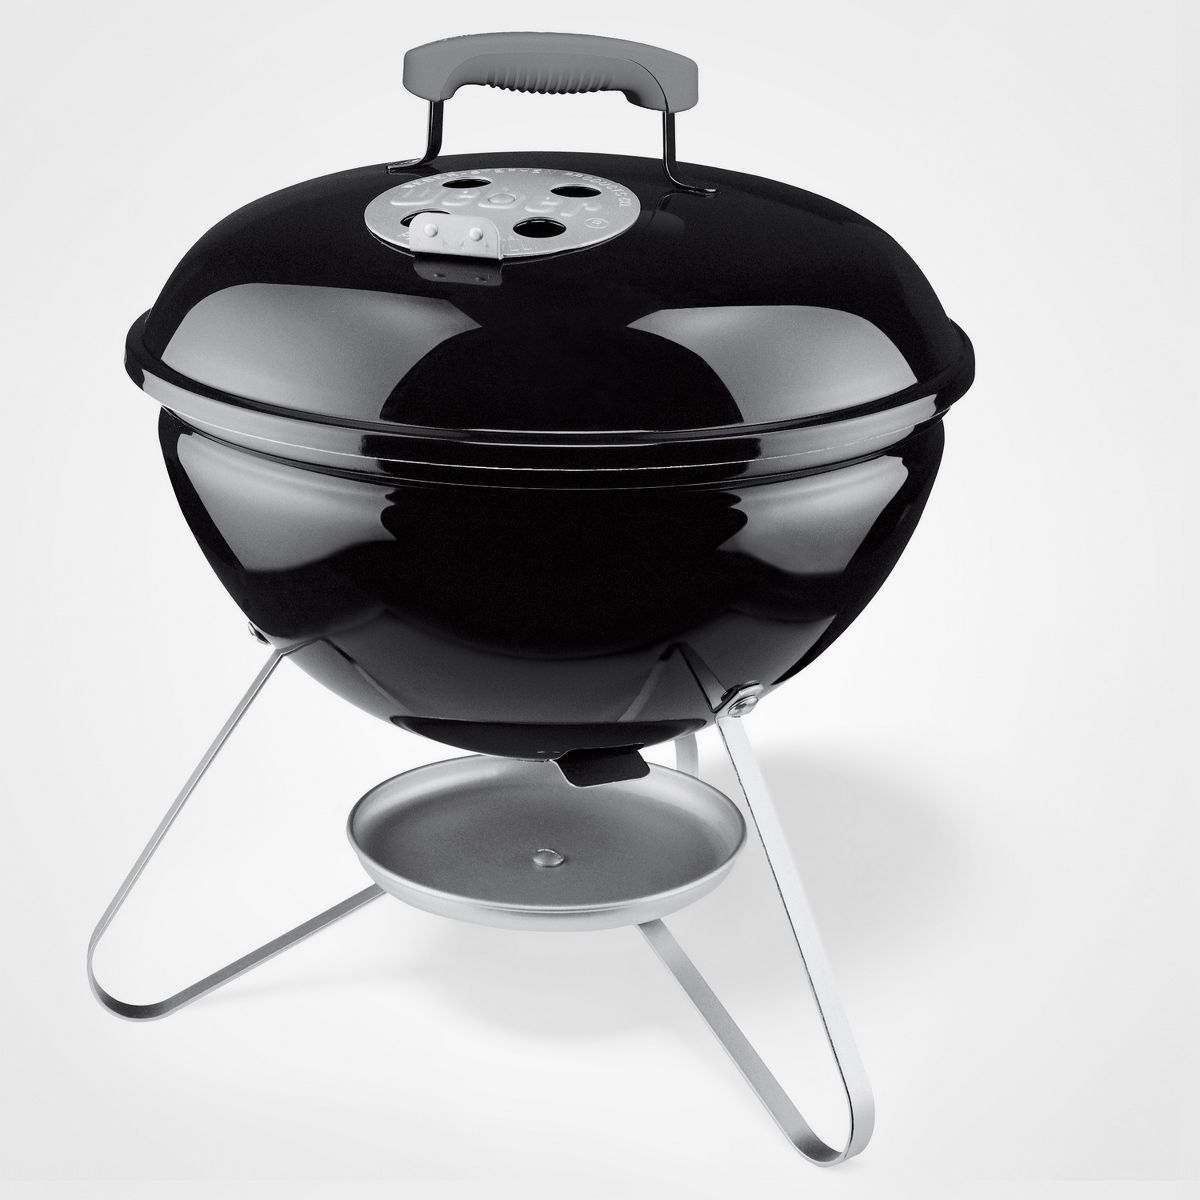 Weber 14" 10020 Portable Grill | Target